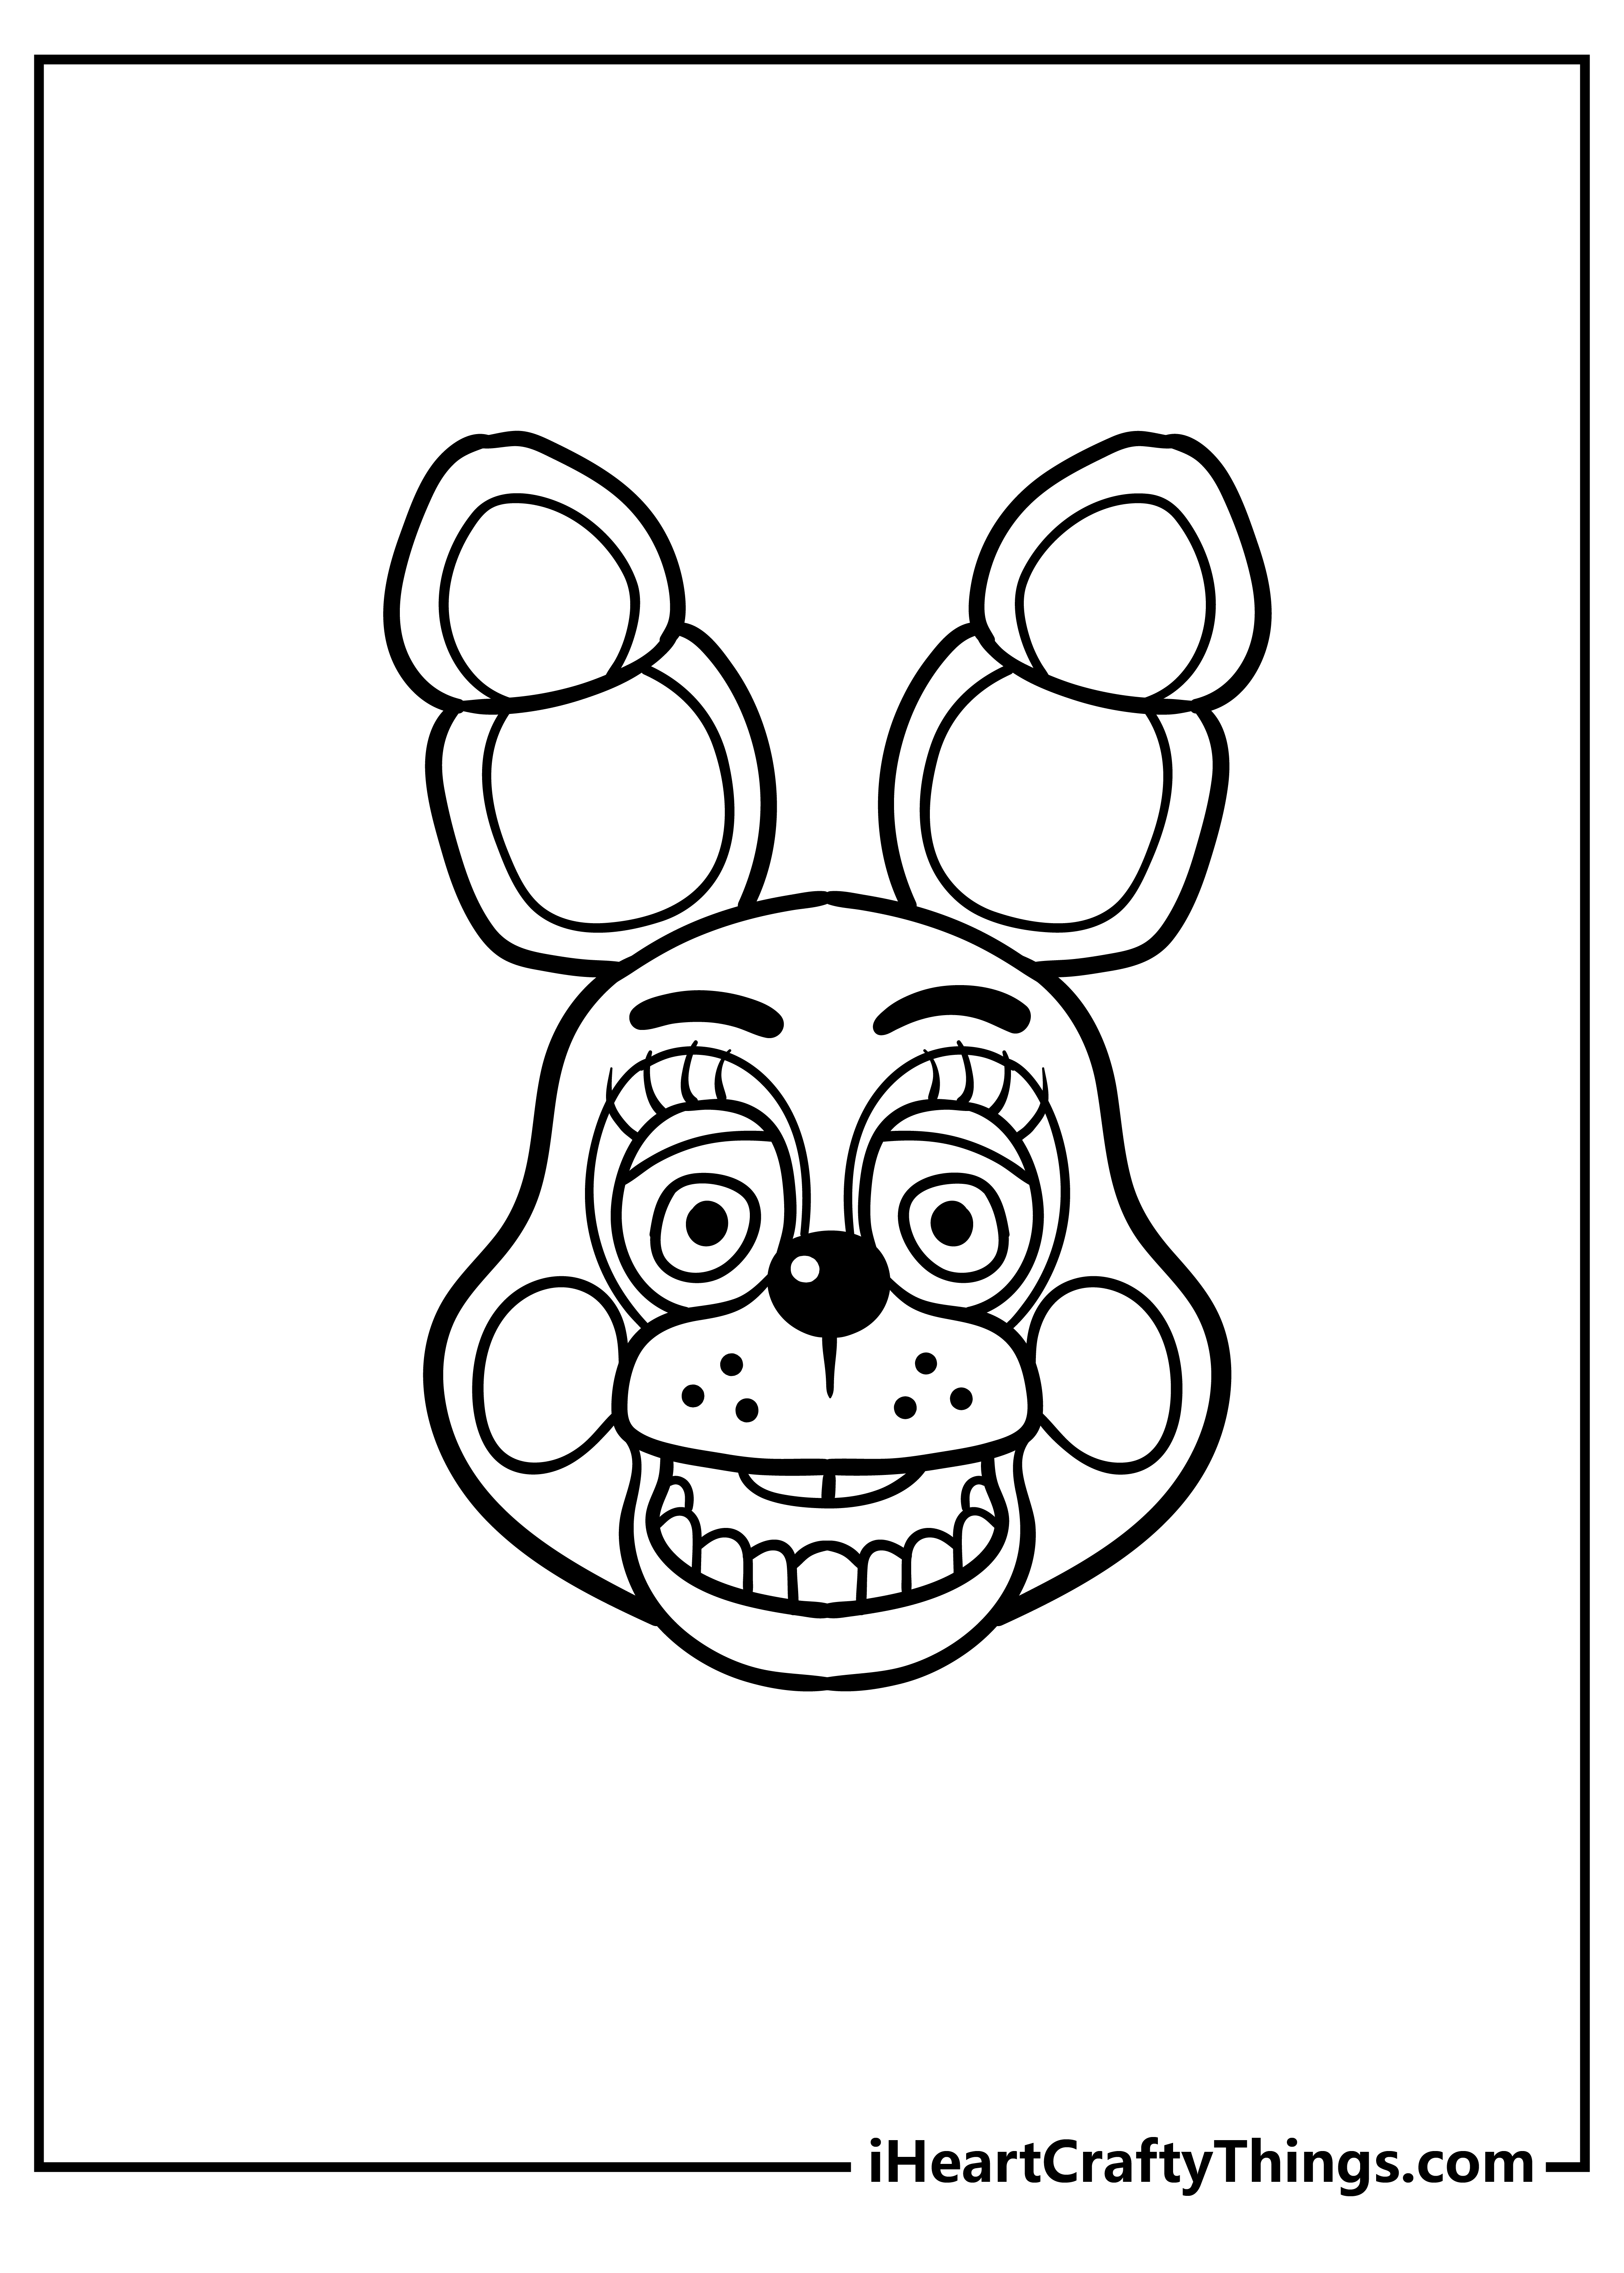 Five Nights At Freddy’s Coloring Pages for preschoolers free printable